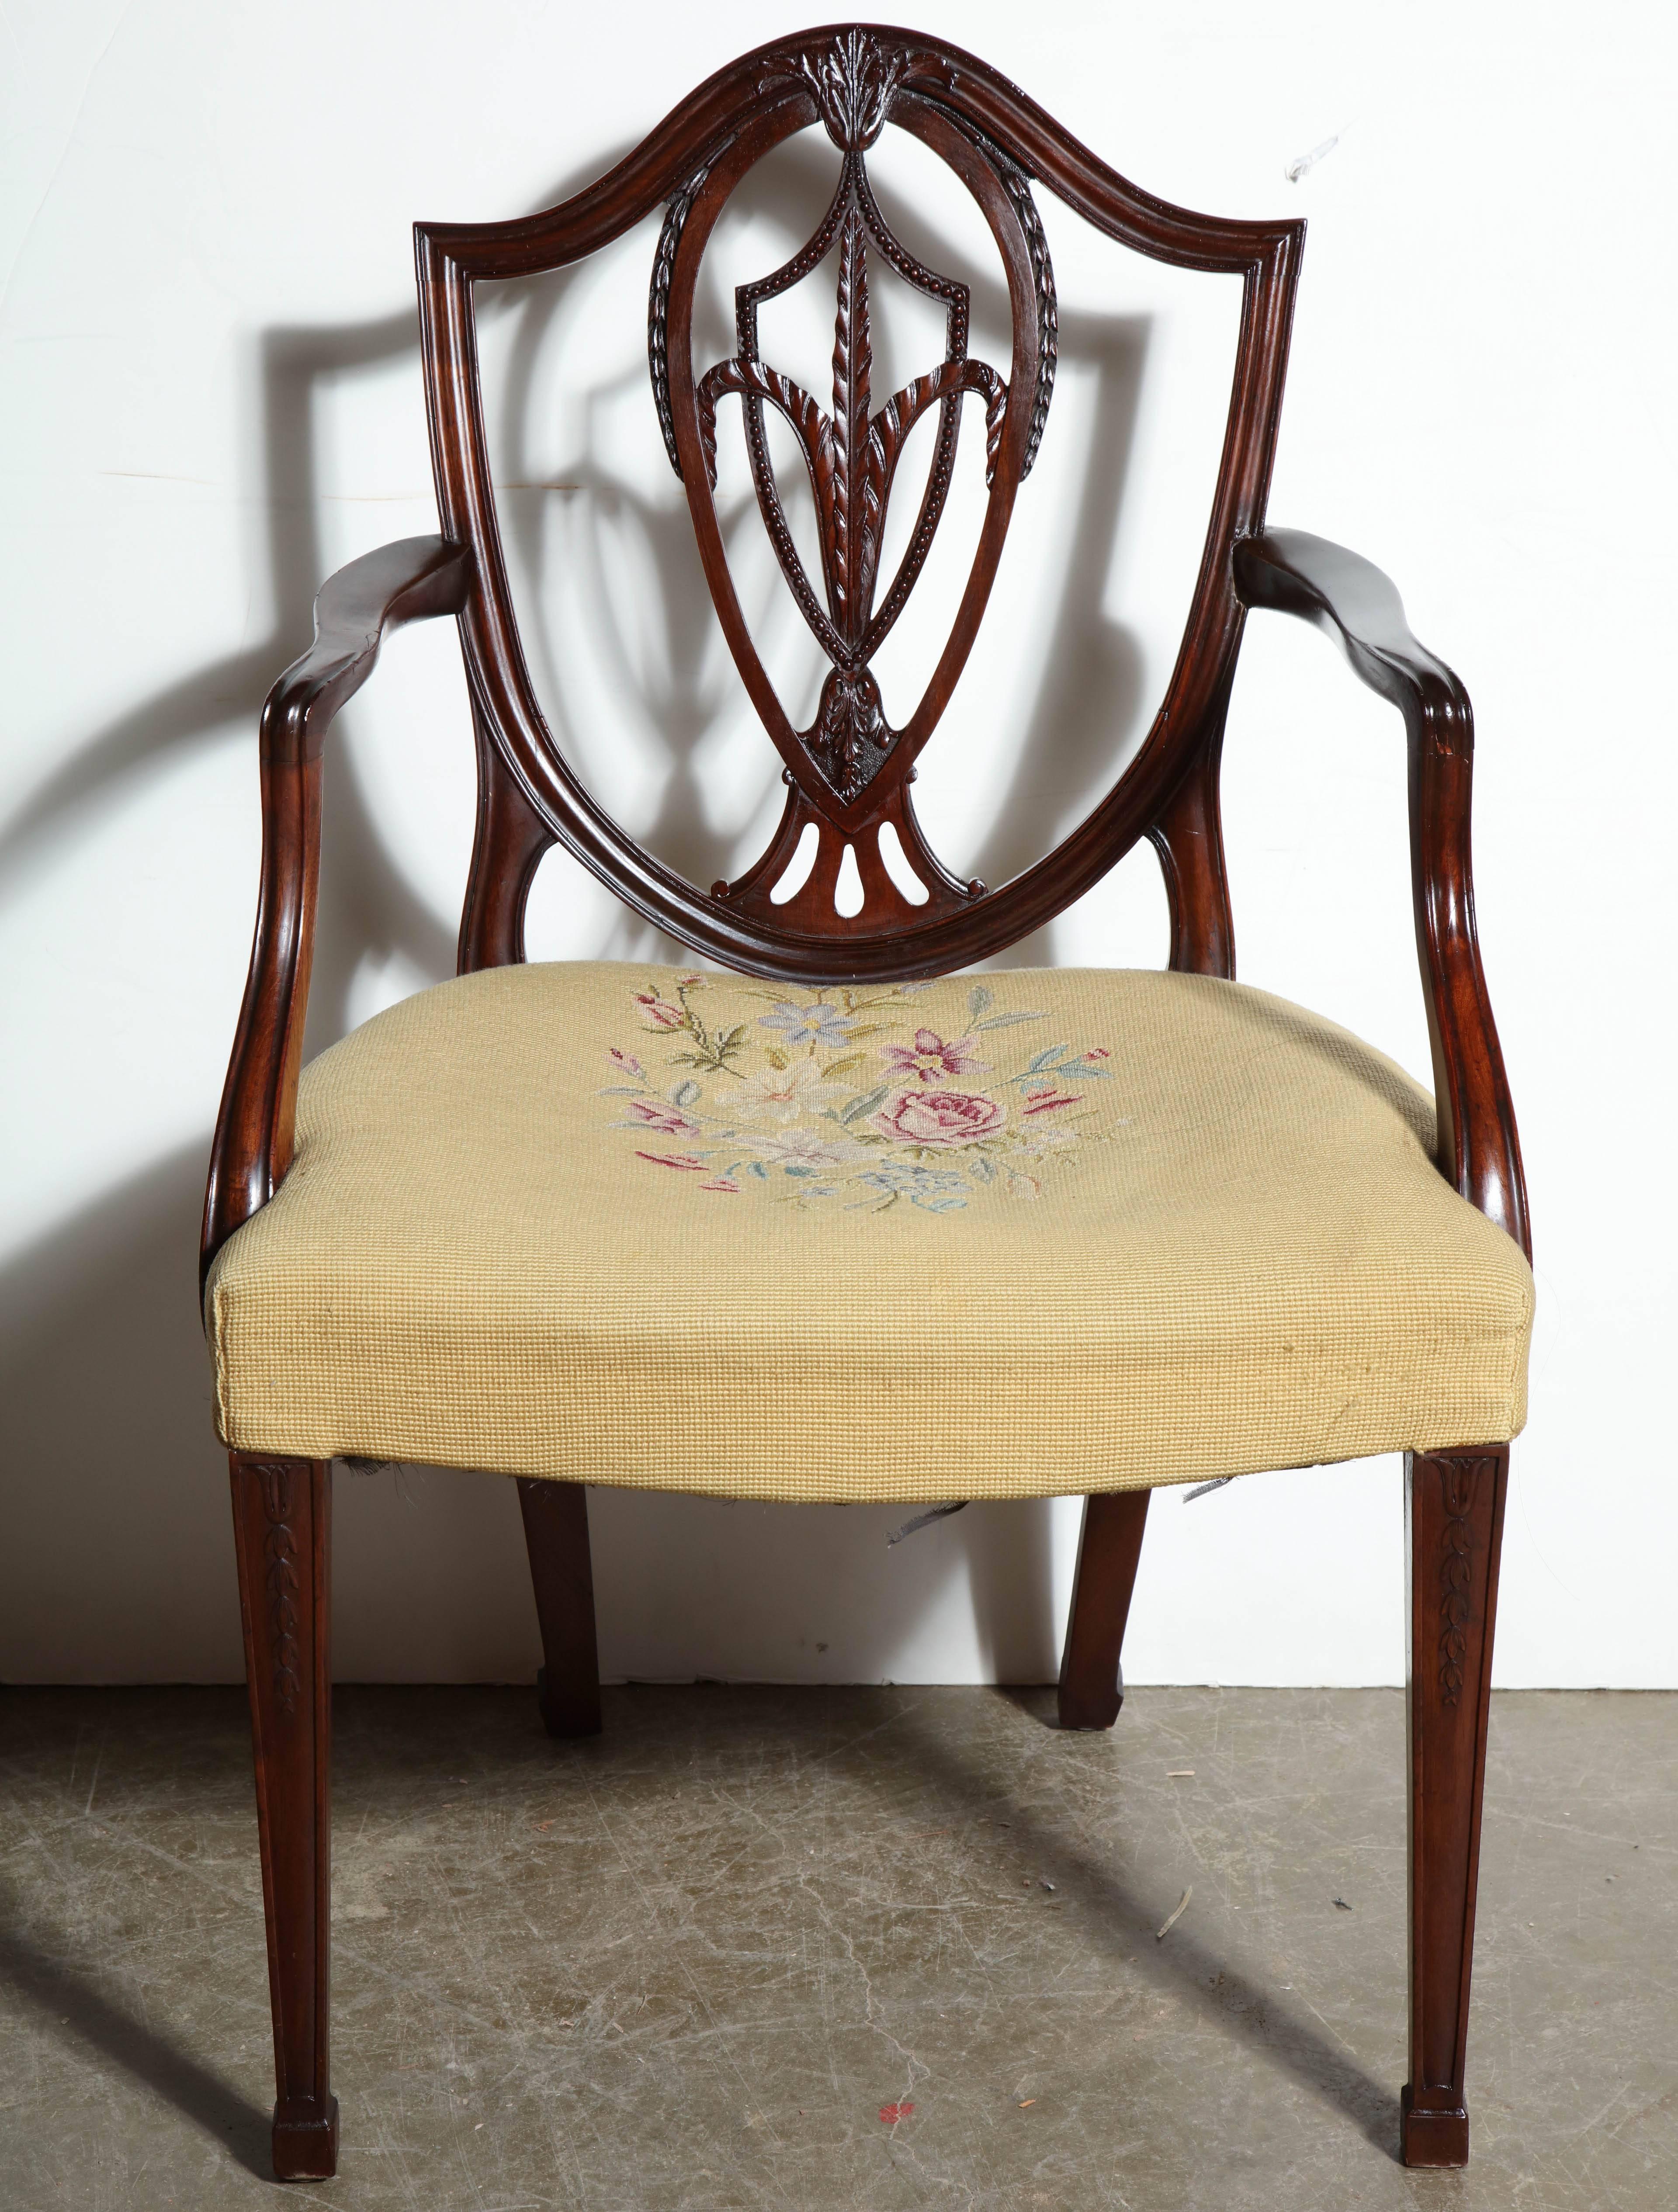 Set of 12 George III (Hepplewhite) mahogany shield back dining chairs with carved interlaced splats, molded arms, spade feet and needlepoint upholstered seats.

The set is comprised of 12 armchairs.